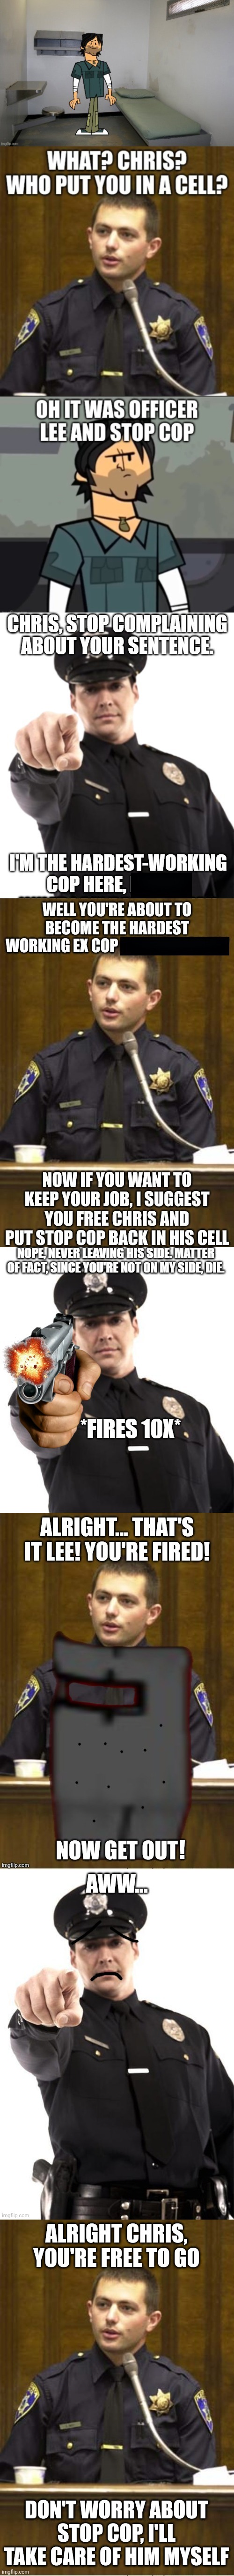 By deciding not to do what he was told, Lee ended up losing his job | ALRIGHT CHRIS, YOU'RE FREE TO GO; DON'T WORRY ABOUT STOP COP, I'LL TAKE CARE OF HIM MYSELF | image tagged in memes,police officer testifying | made w/ Imgflip meme maker